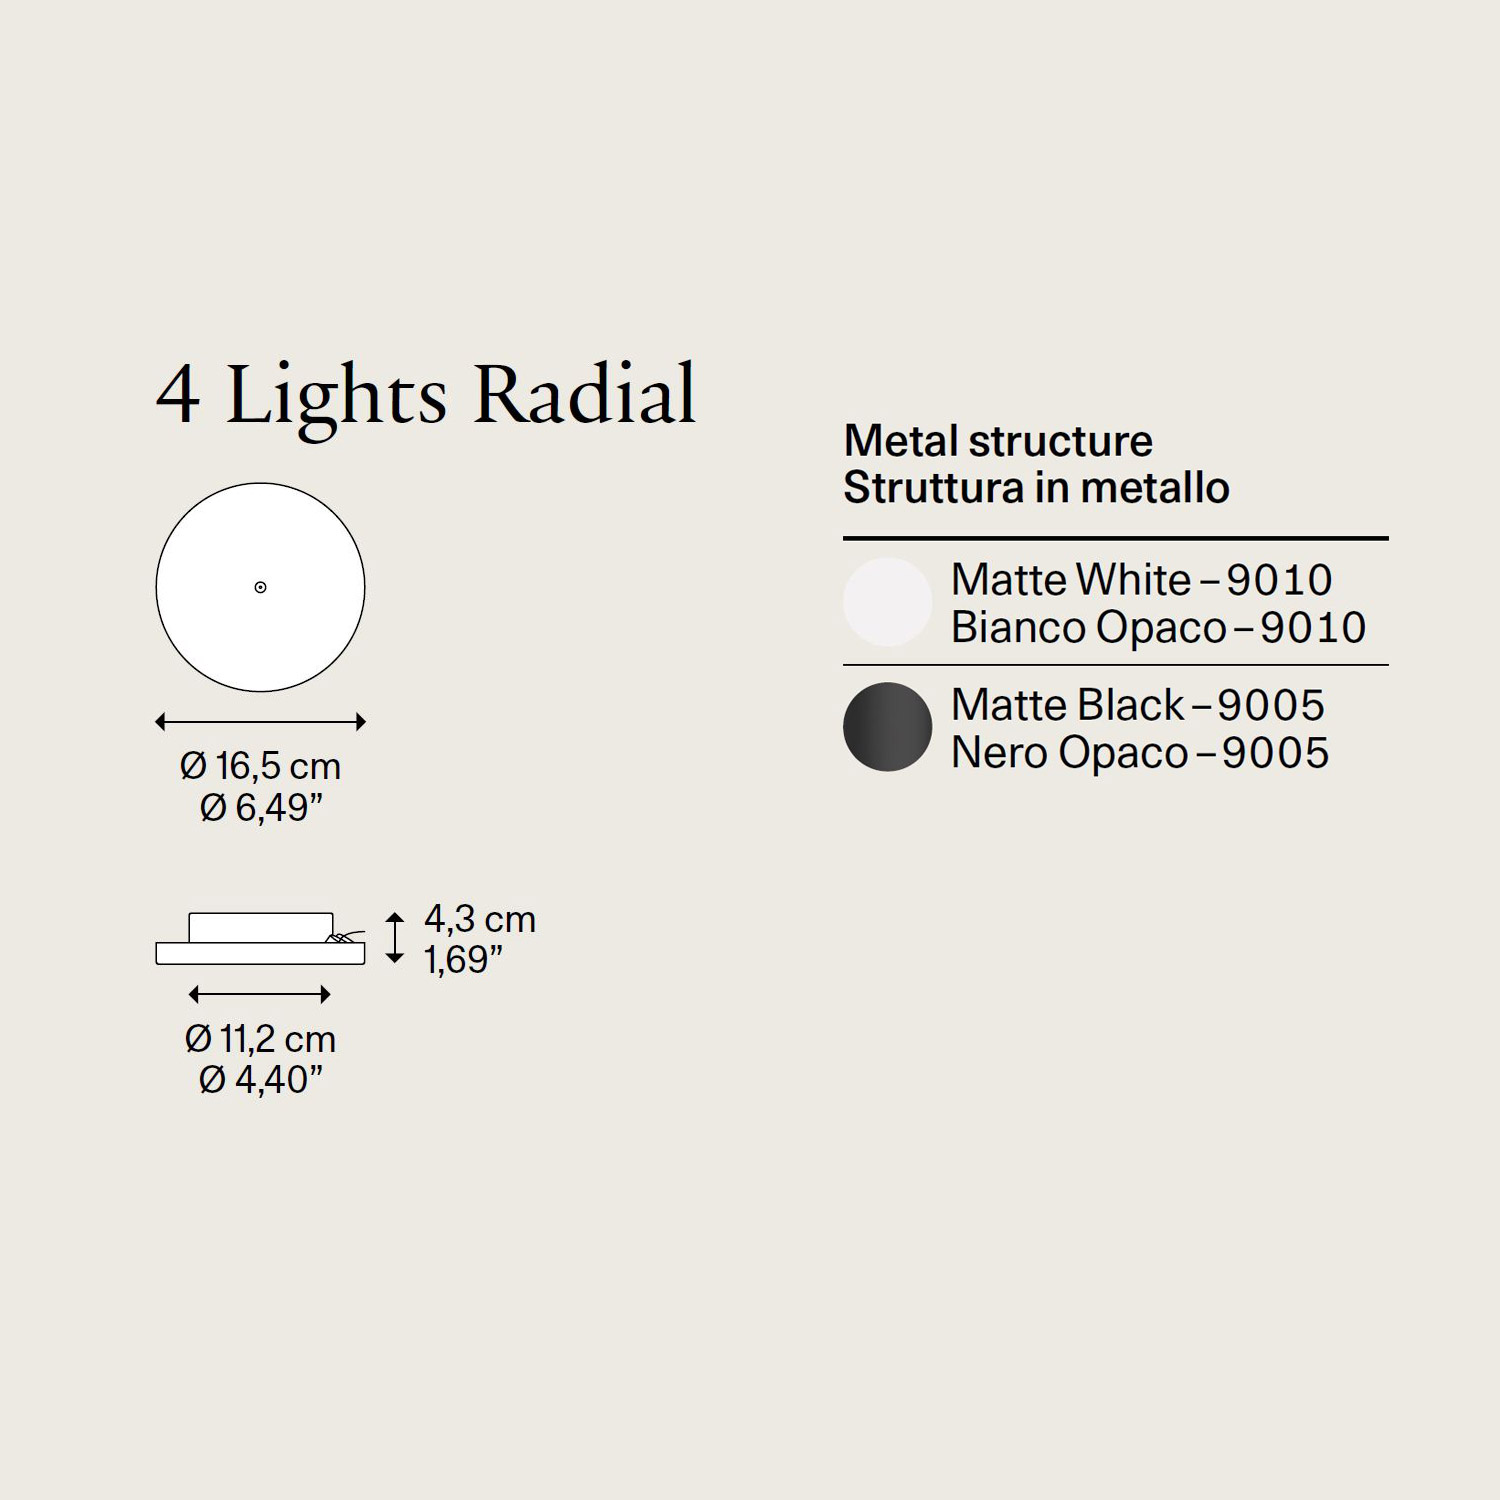 1-4 Lights Radial canopy by Lodes